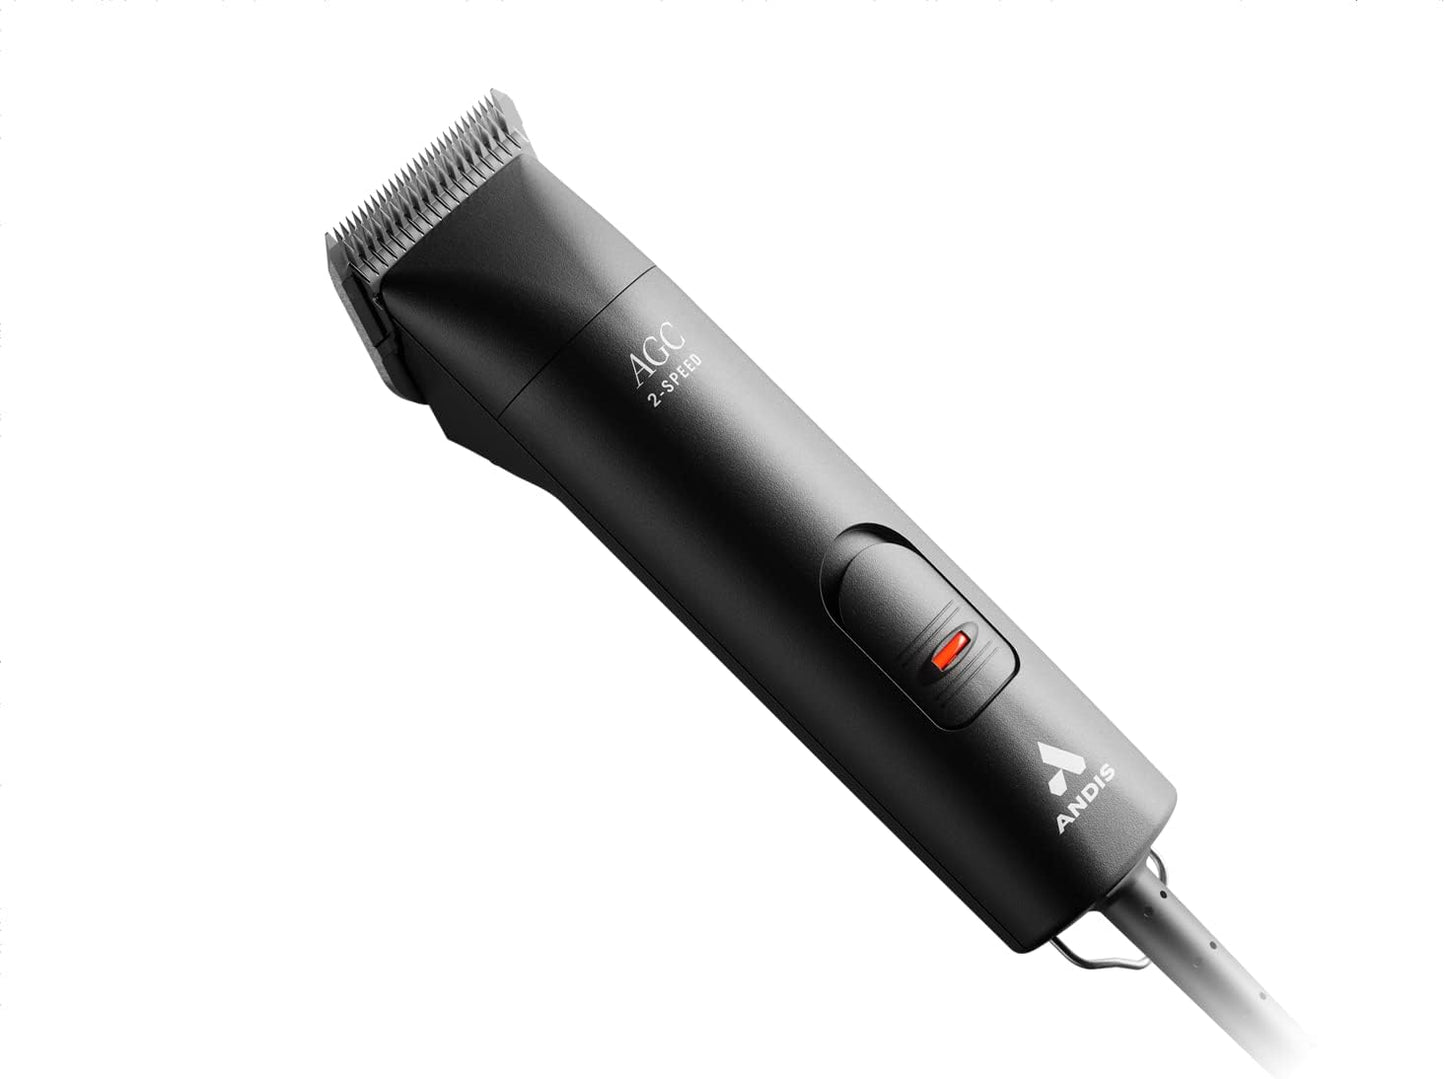 Andis 24675 UltraEdge 2-Speed Detachable Blade Clipper \u2013 Runs Cool & Quiet, Designed with Two-Speed Rotary Motor & Shatter-Proof Housing - For All Coats & Breeds - 120 Volts, Black